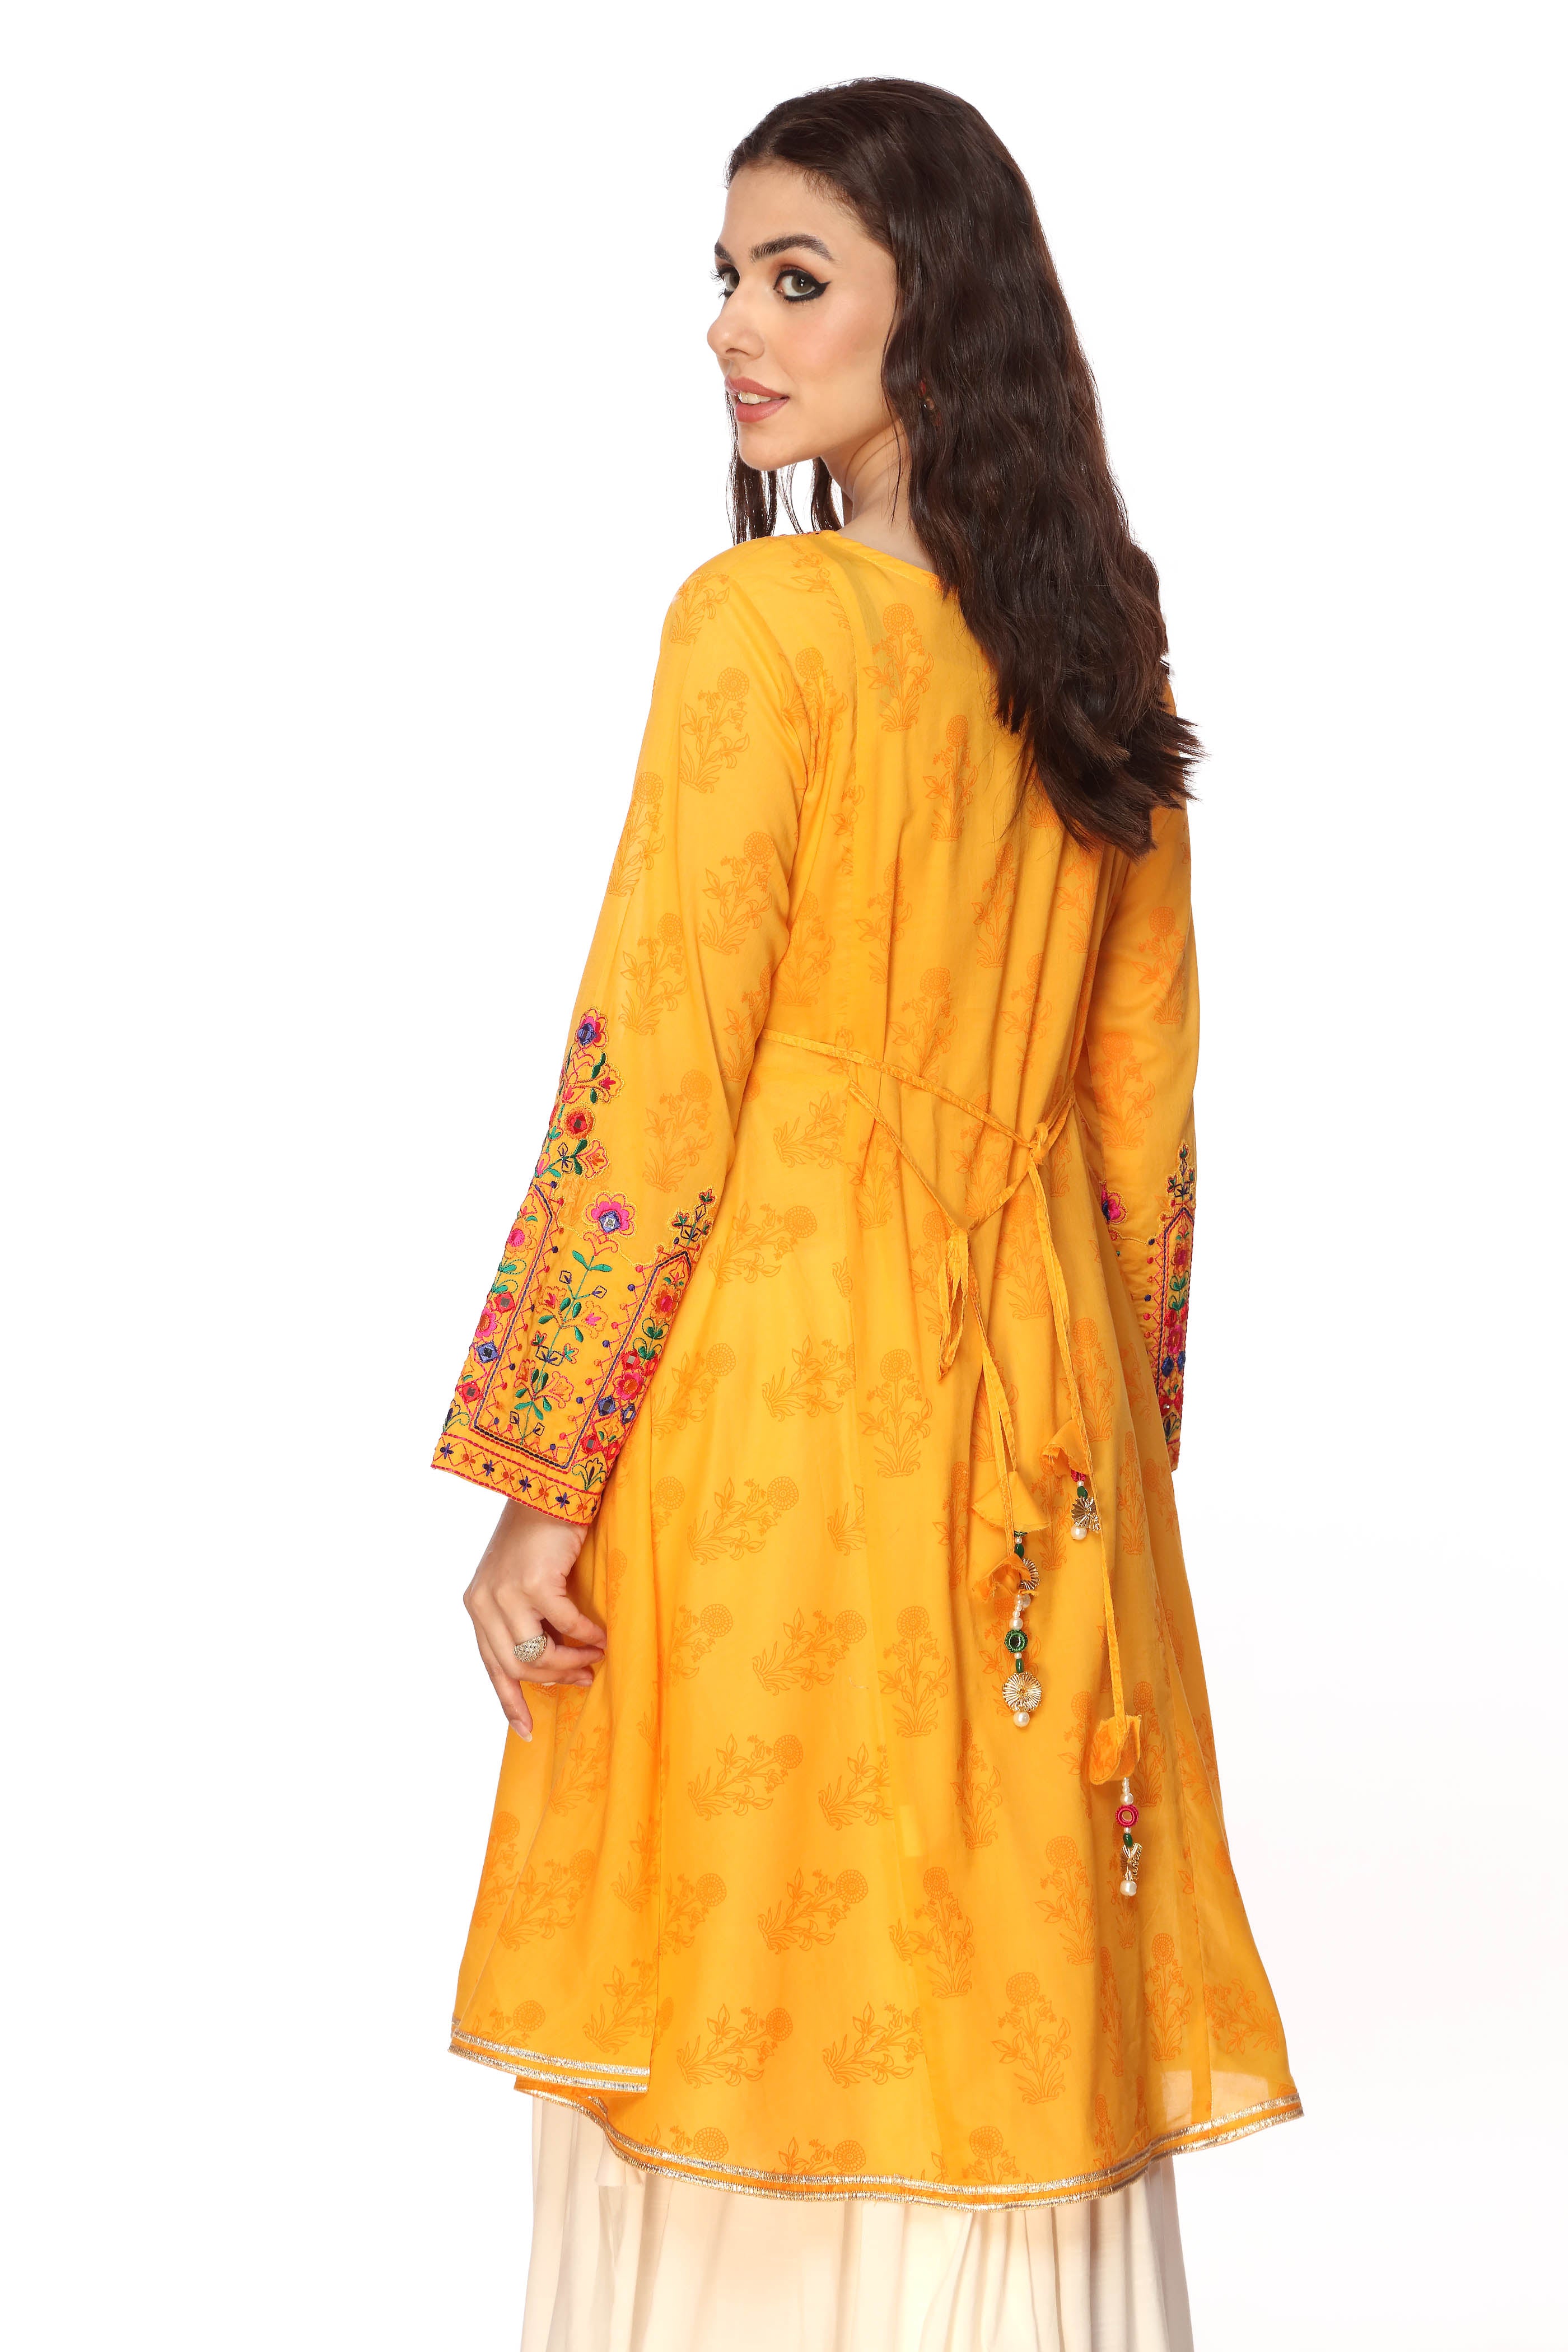 Sun Flower Ll in Yellow coloured Printed Lawn fabric 3